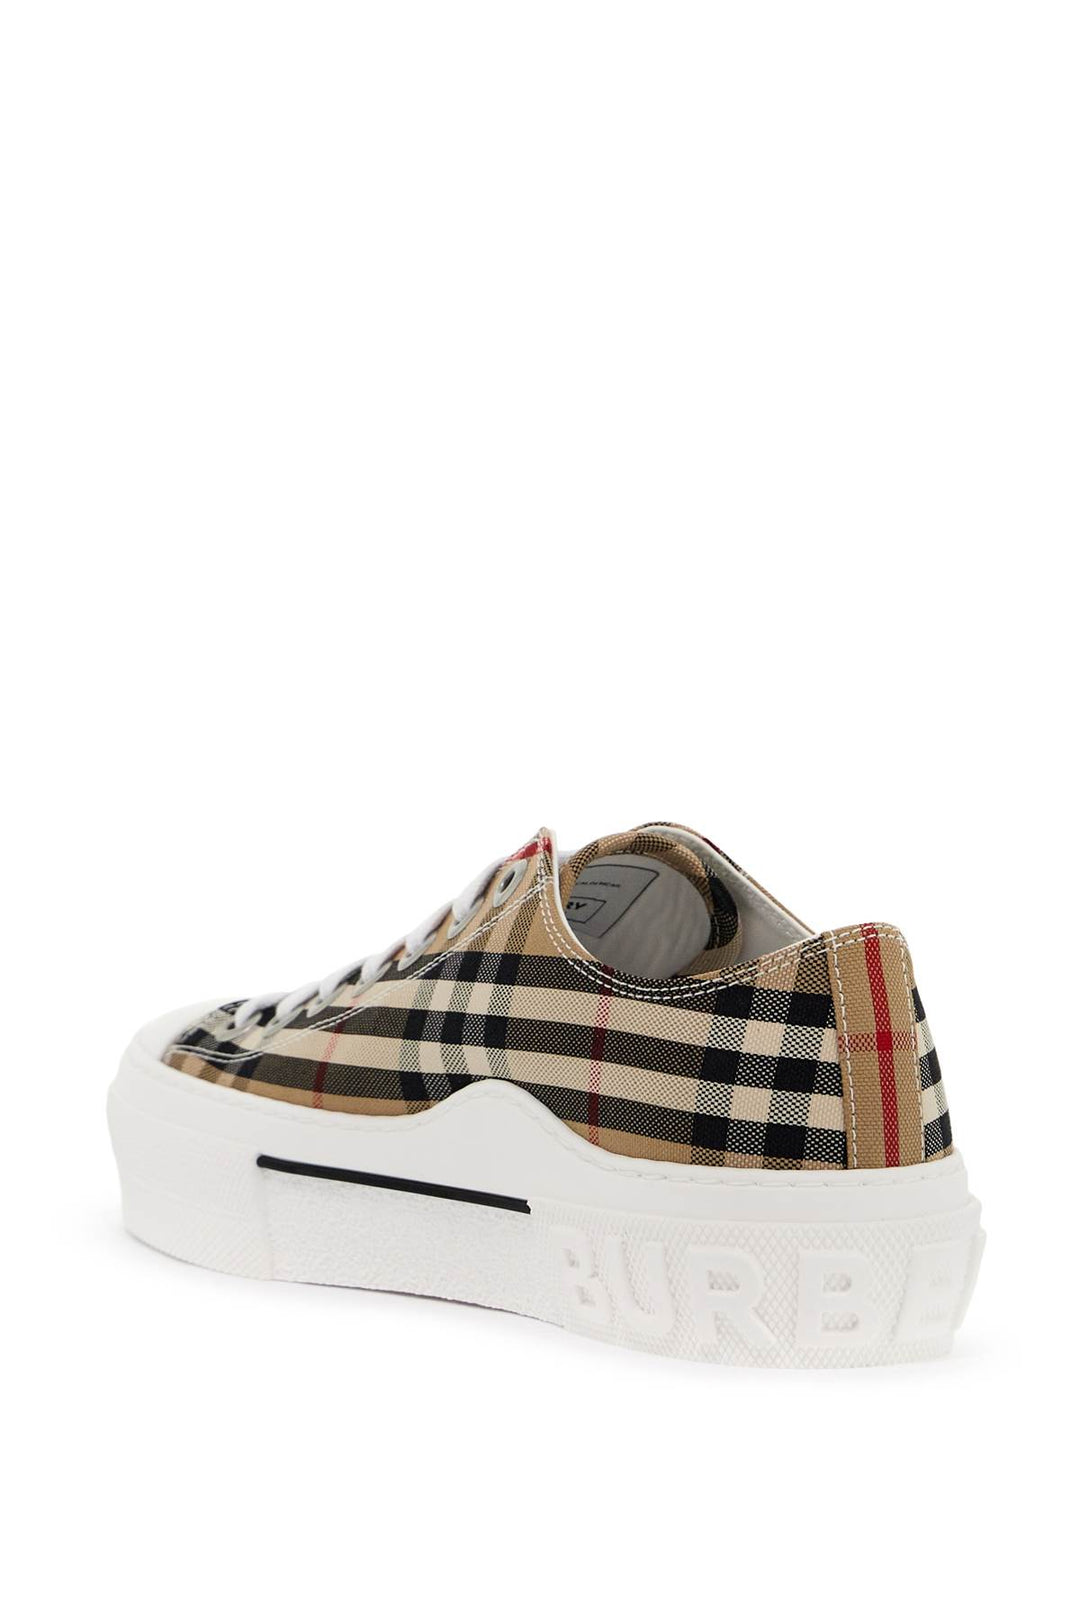 Burberry Vintage Check Low Sneakers   Beige